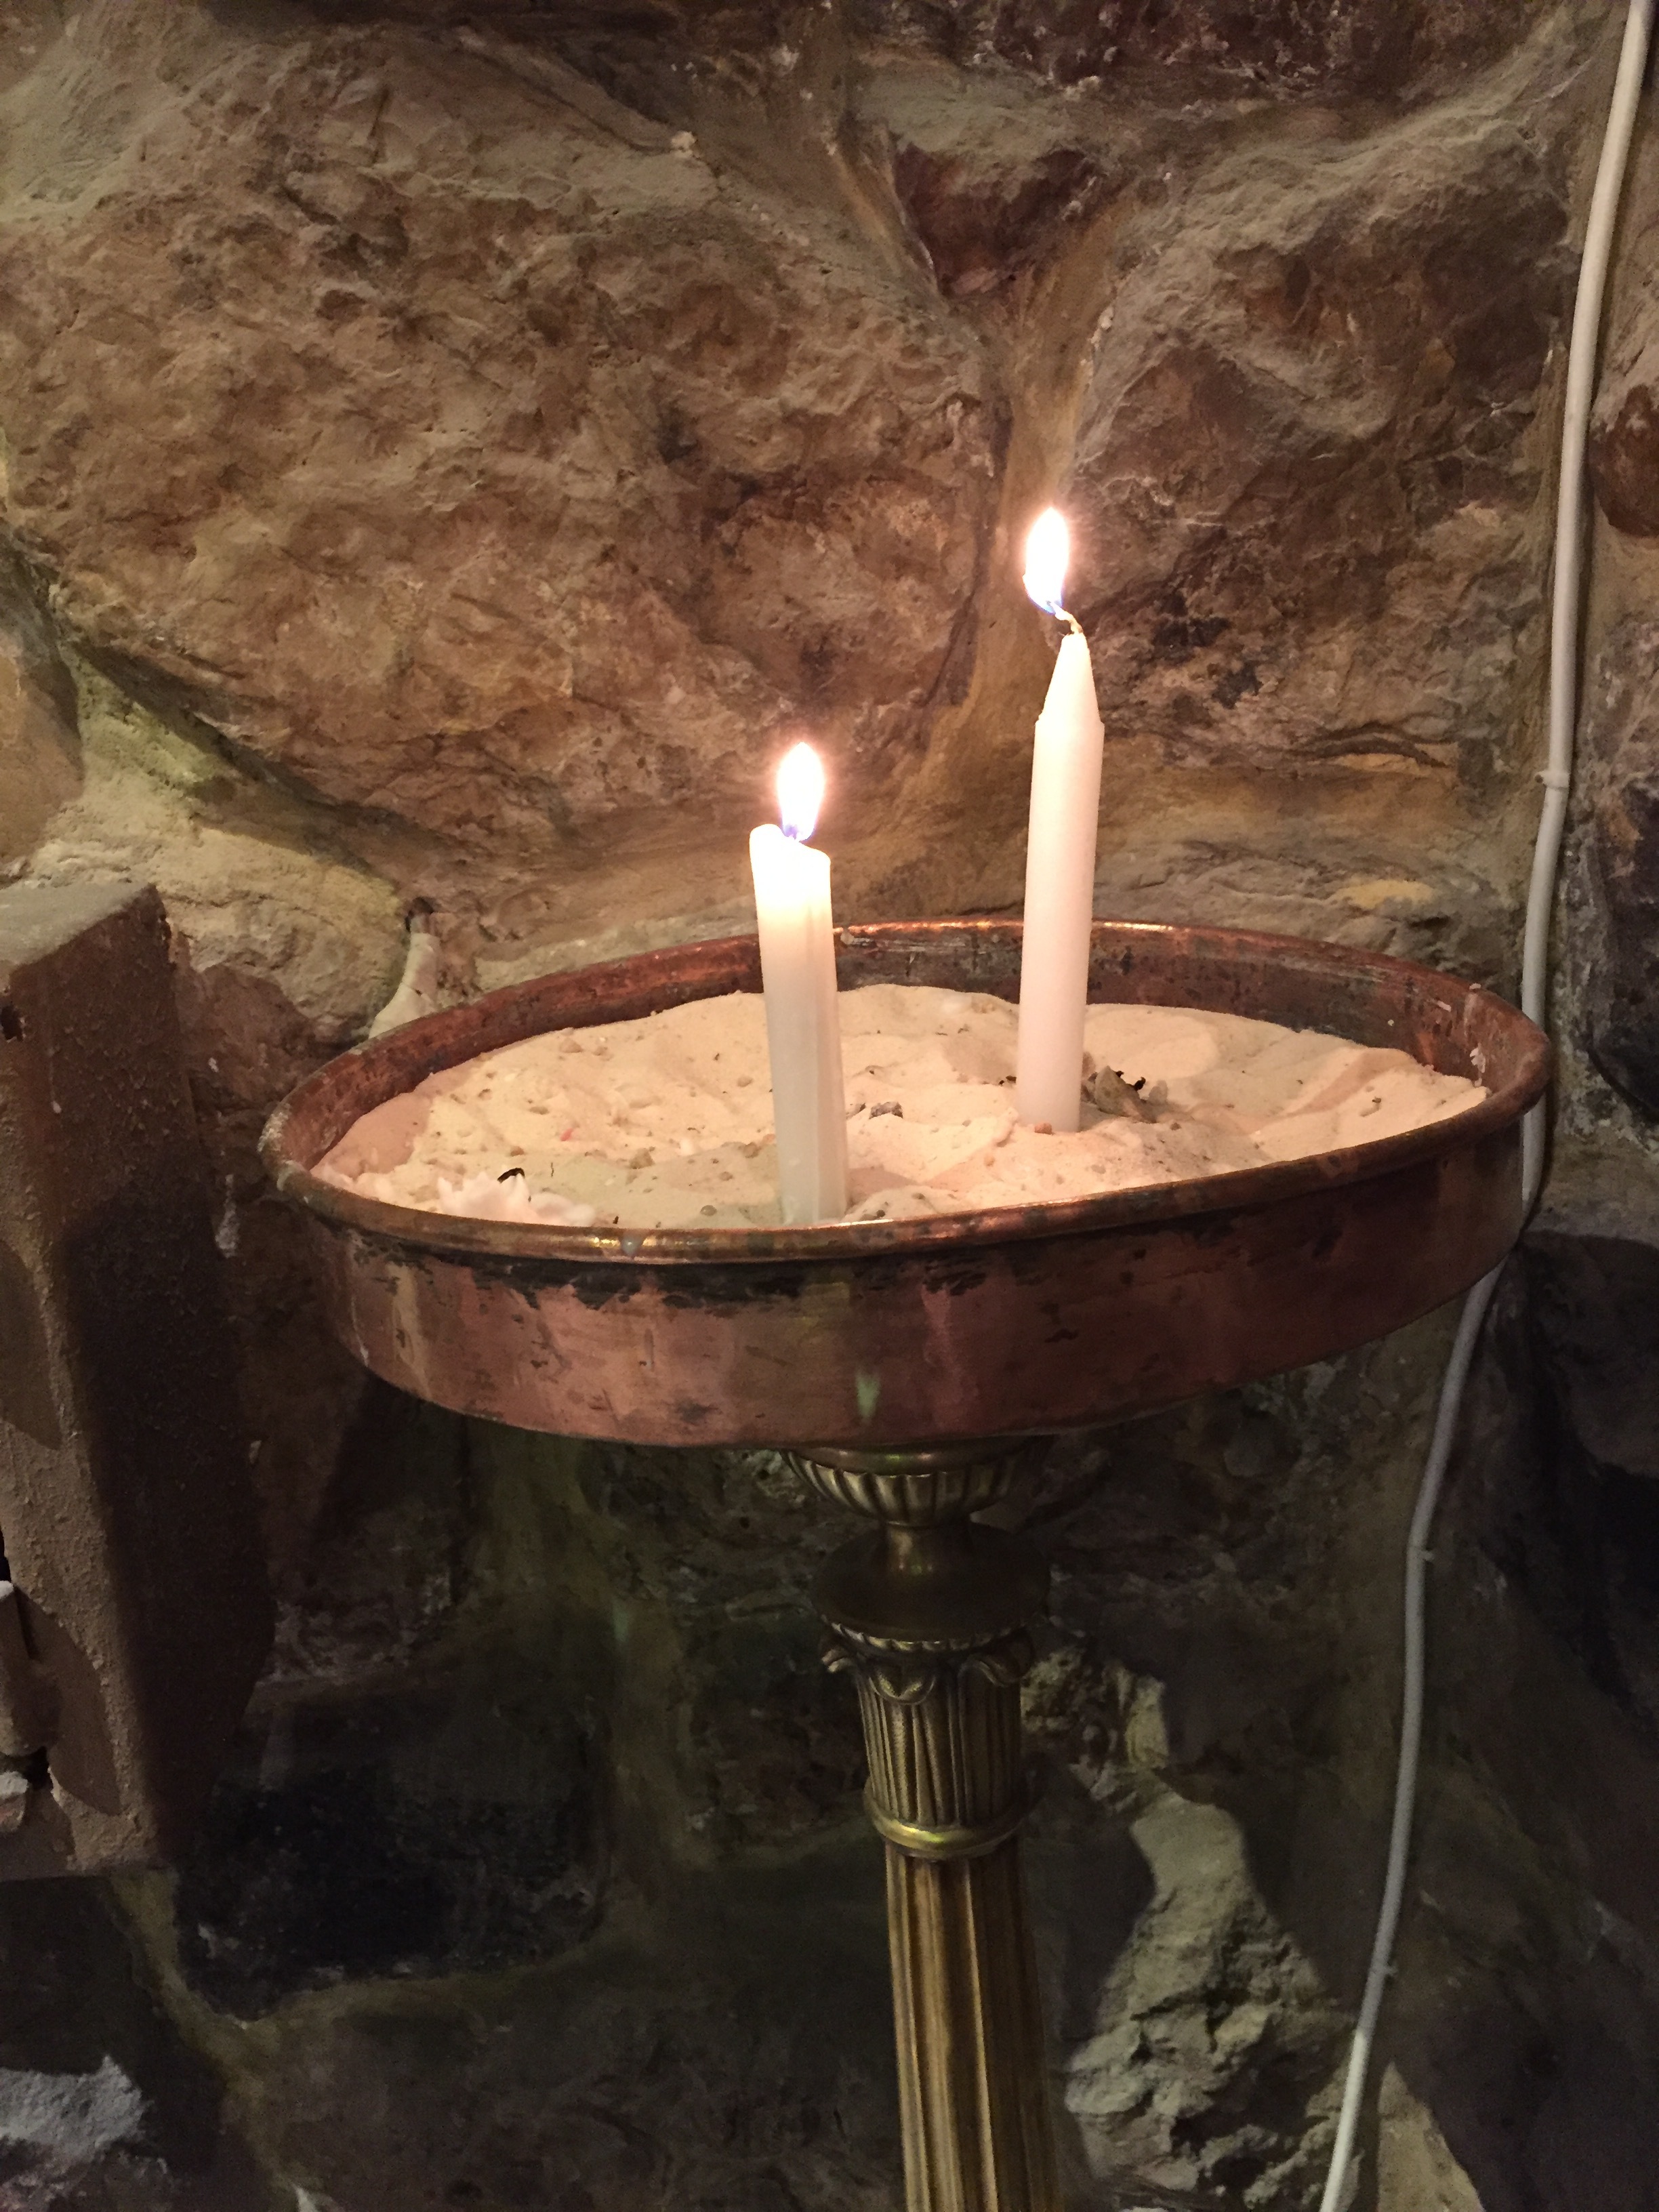  Lighting a candle of peace in the Ananias Chapel where tradition says Saul was baptized as Paul 